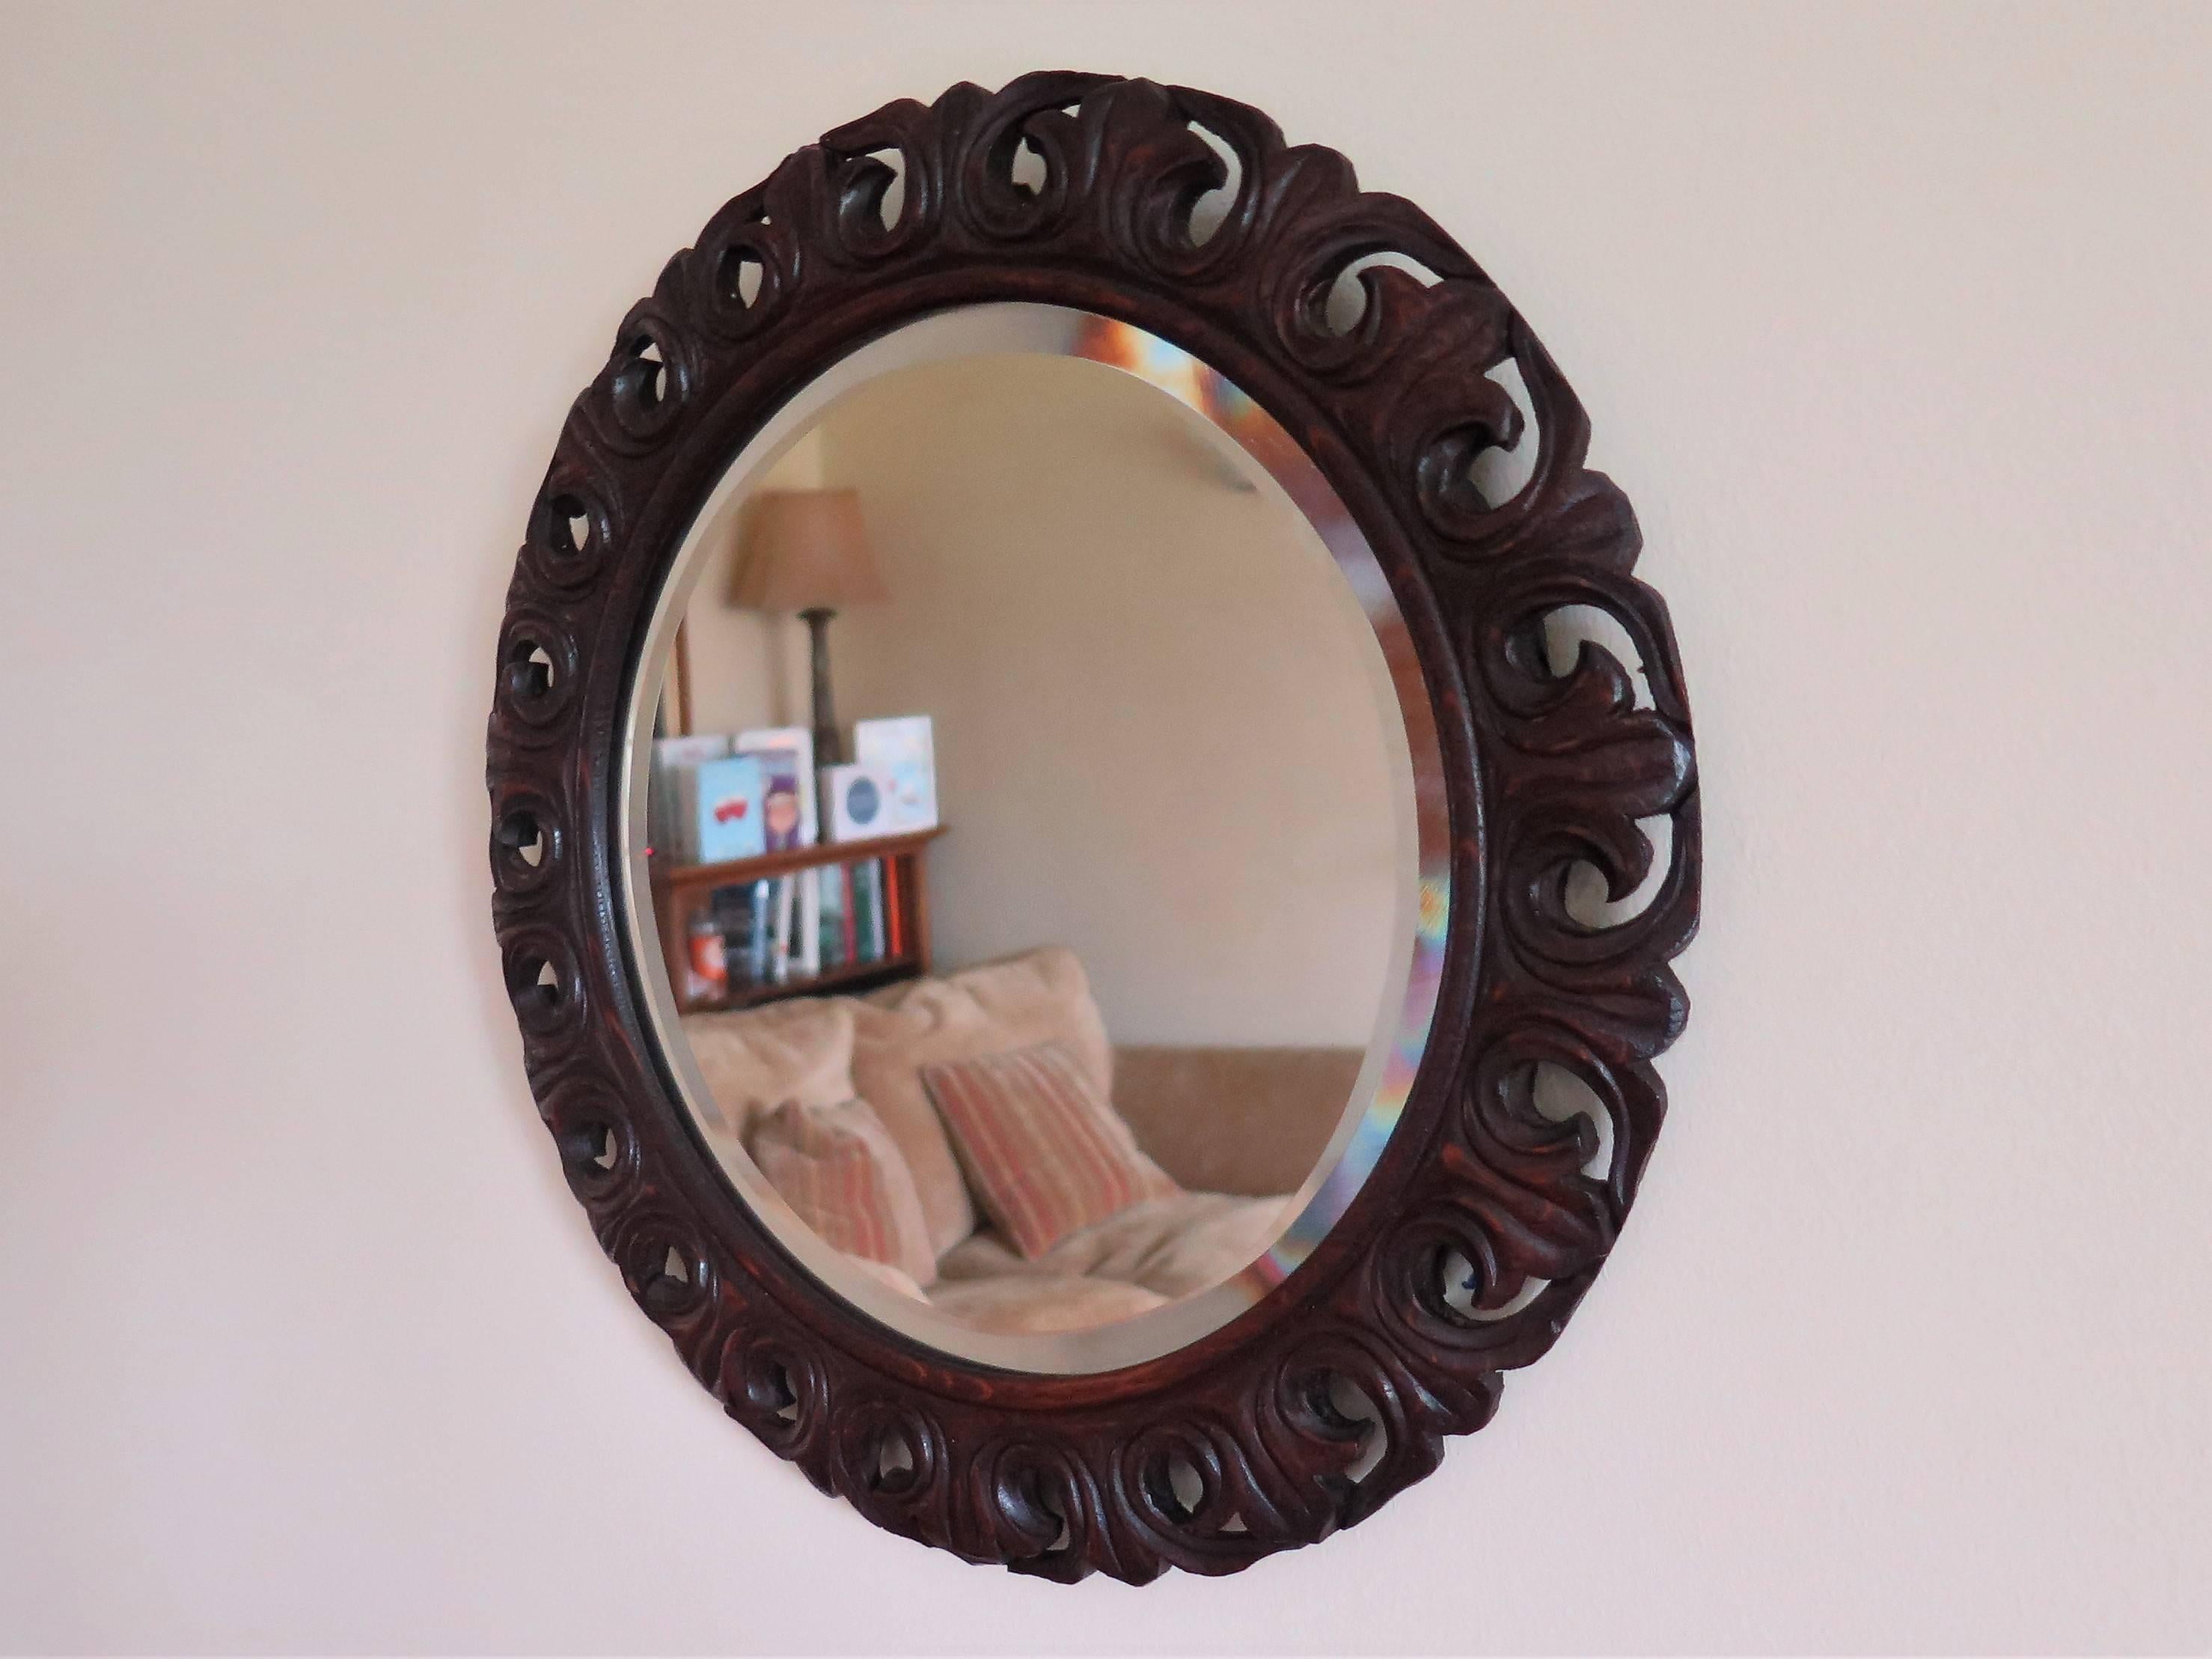 This is a good and unusual oak framed circular mirror which we date to the late 19th century.

The frame is made of solid oak and has been beautifully hand carved in a continuous pierced scroll form in a Jackobean style, typically seen on early